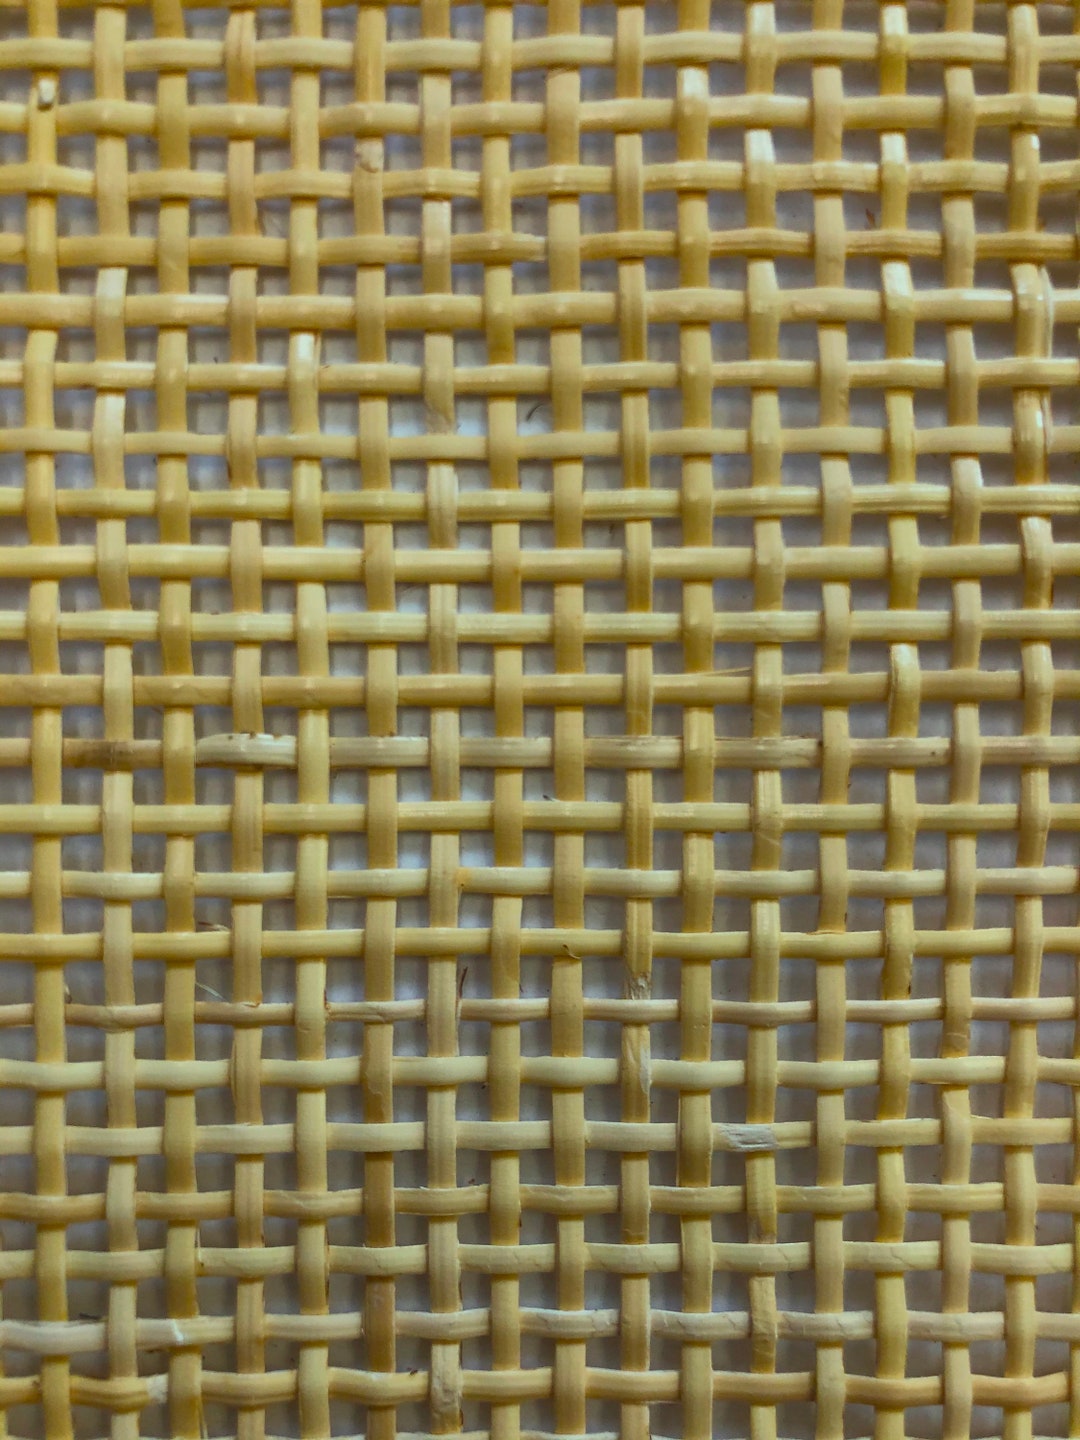 27.5 Wide, NATURAL Radio Weave Rattan Cane Webbing, Buy More Save More. 